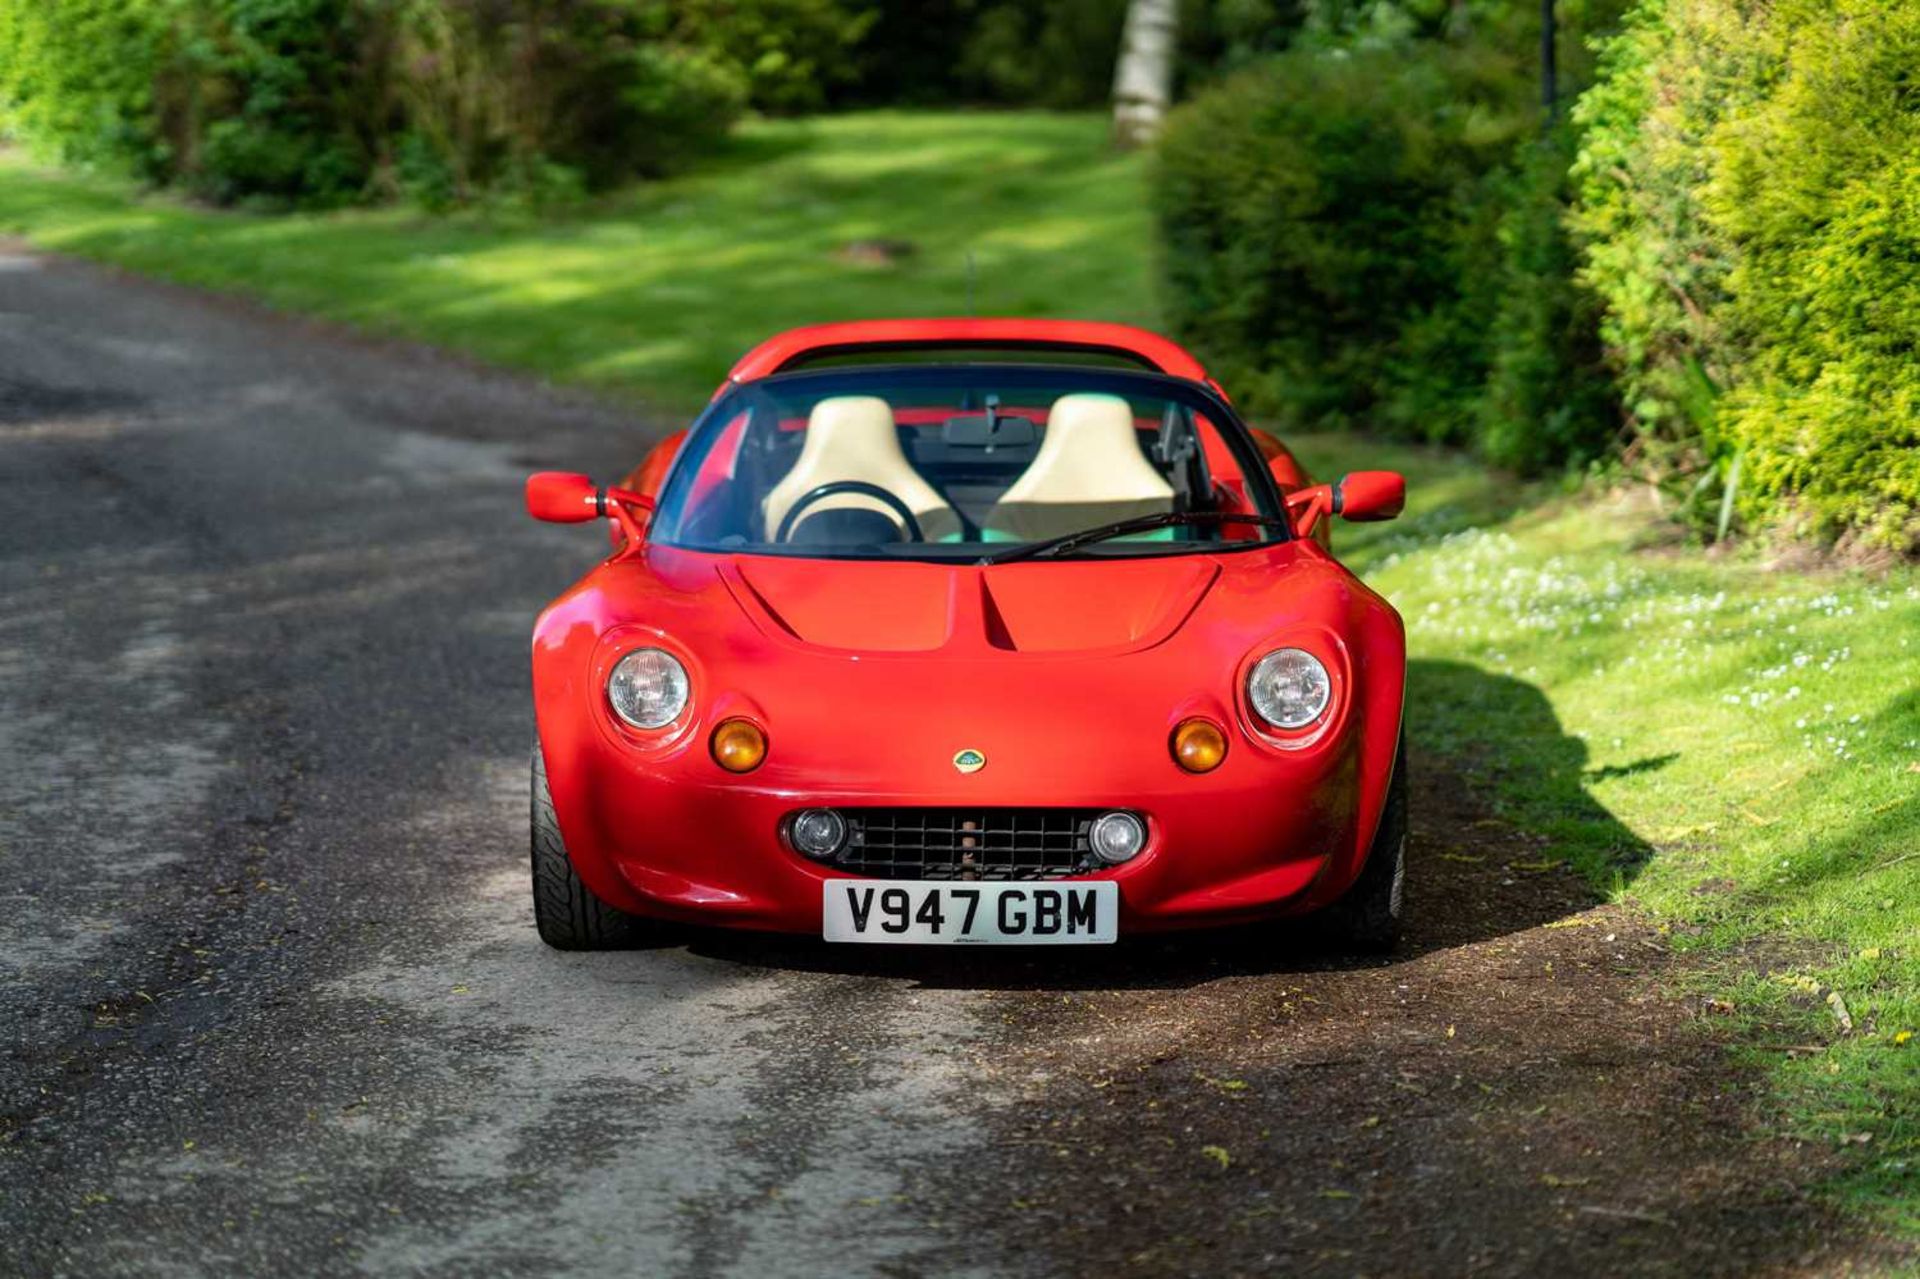 1999 Lotus Elise S1 Only 39,000 miles from new - Image 5 of 57